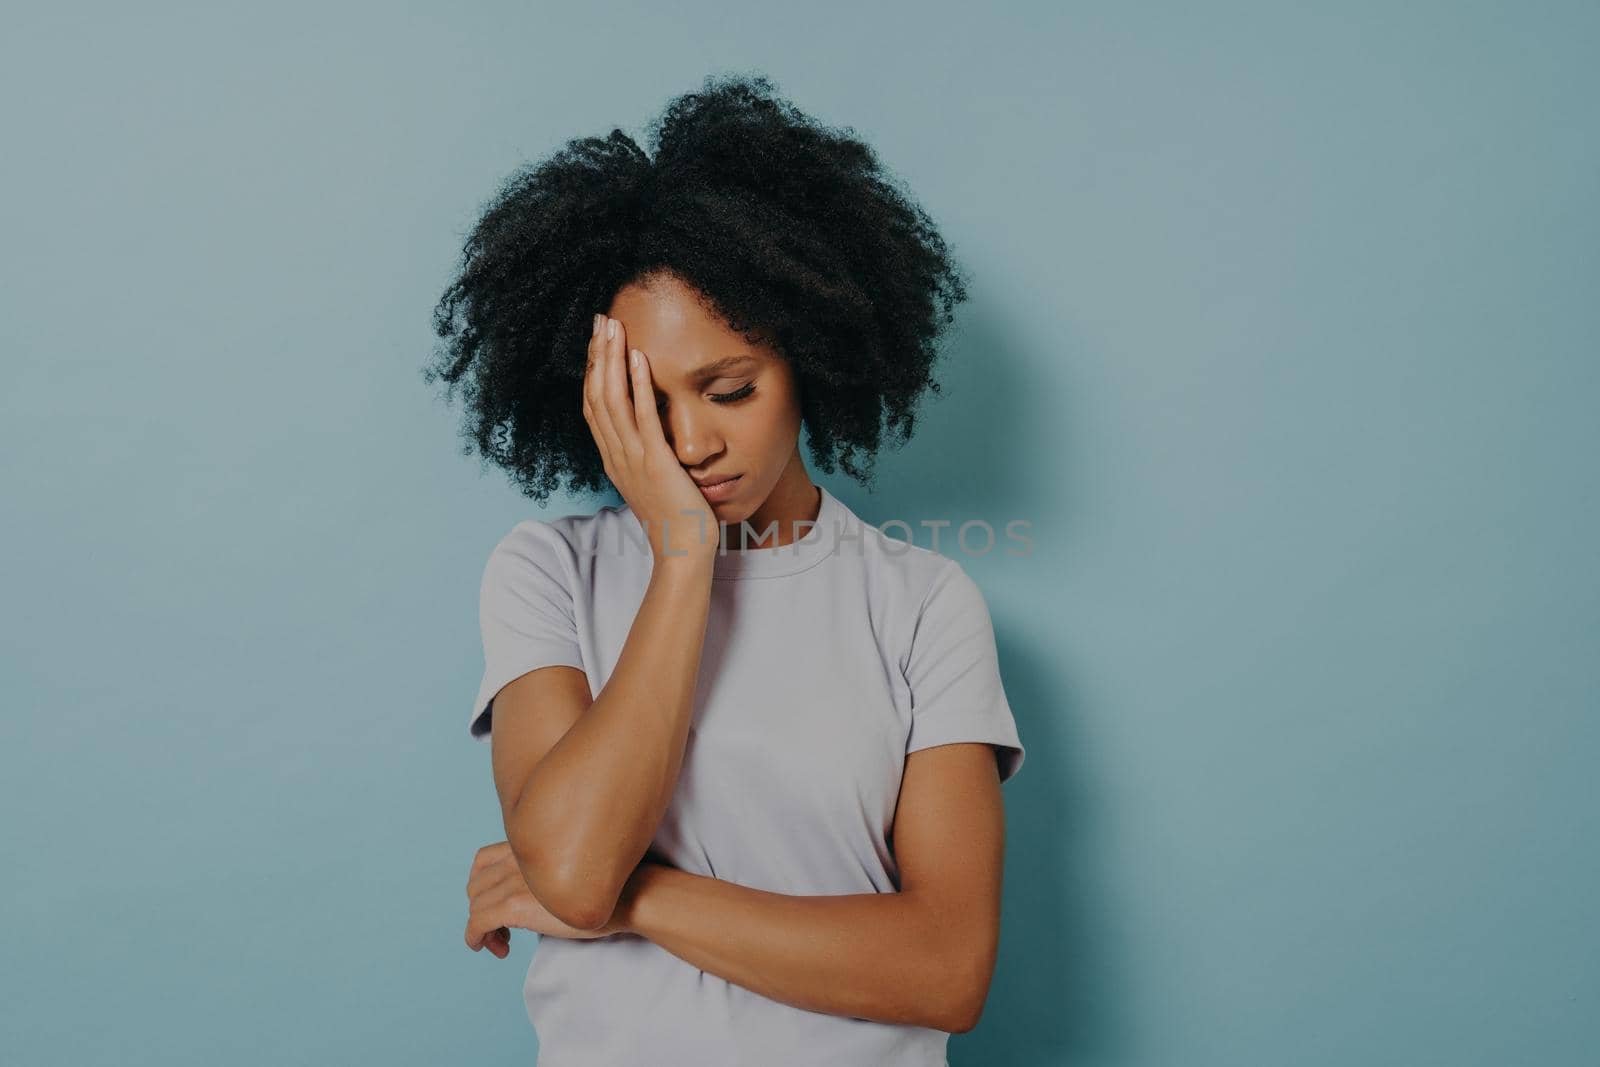 Portrait of upset African woman wearing casual clothes holding head with hand, having stressful look while suffering from migraine or headache. Unhappy female feeling frustrated, closing eyes tight